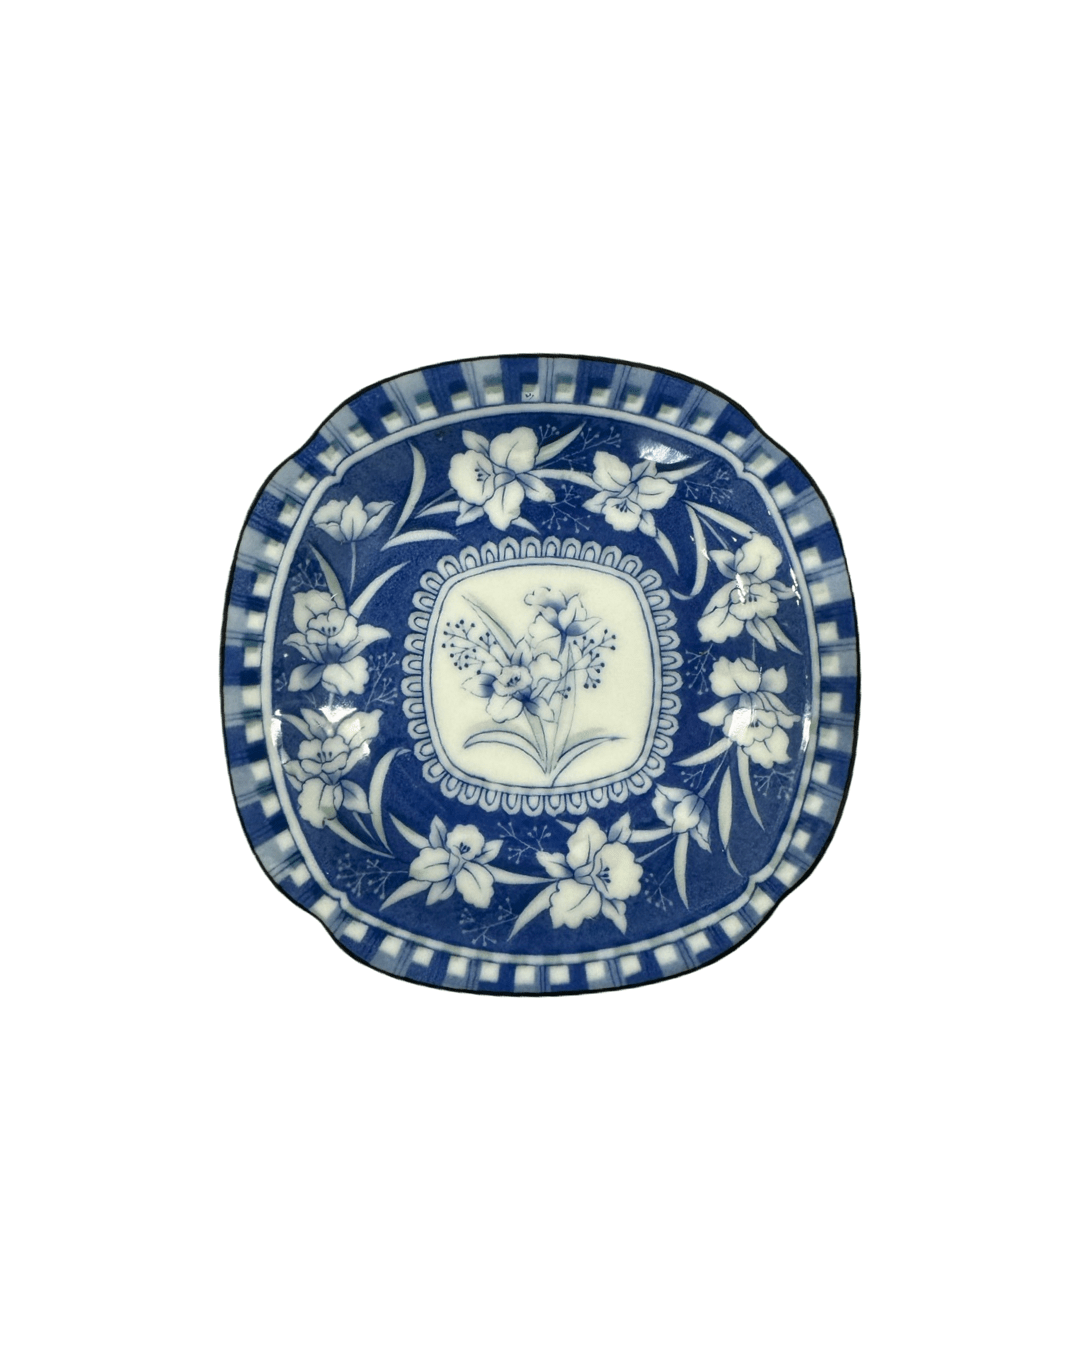 Case Study Objects Blue and White Patterned Decorative Plate La Bomba Floristry Vancouver Canada